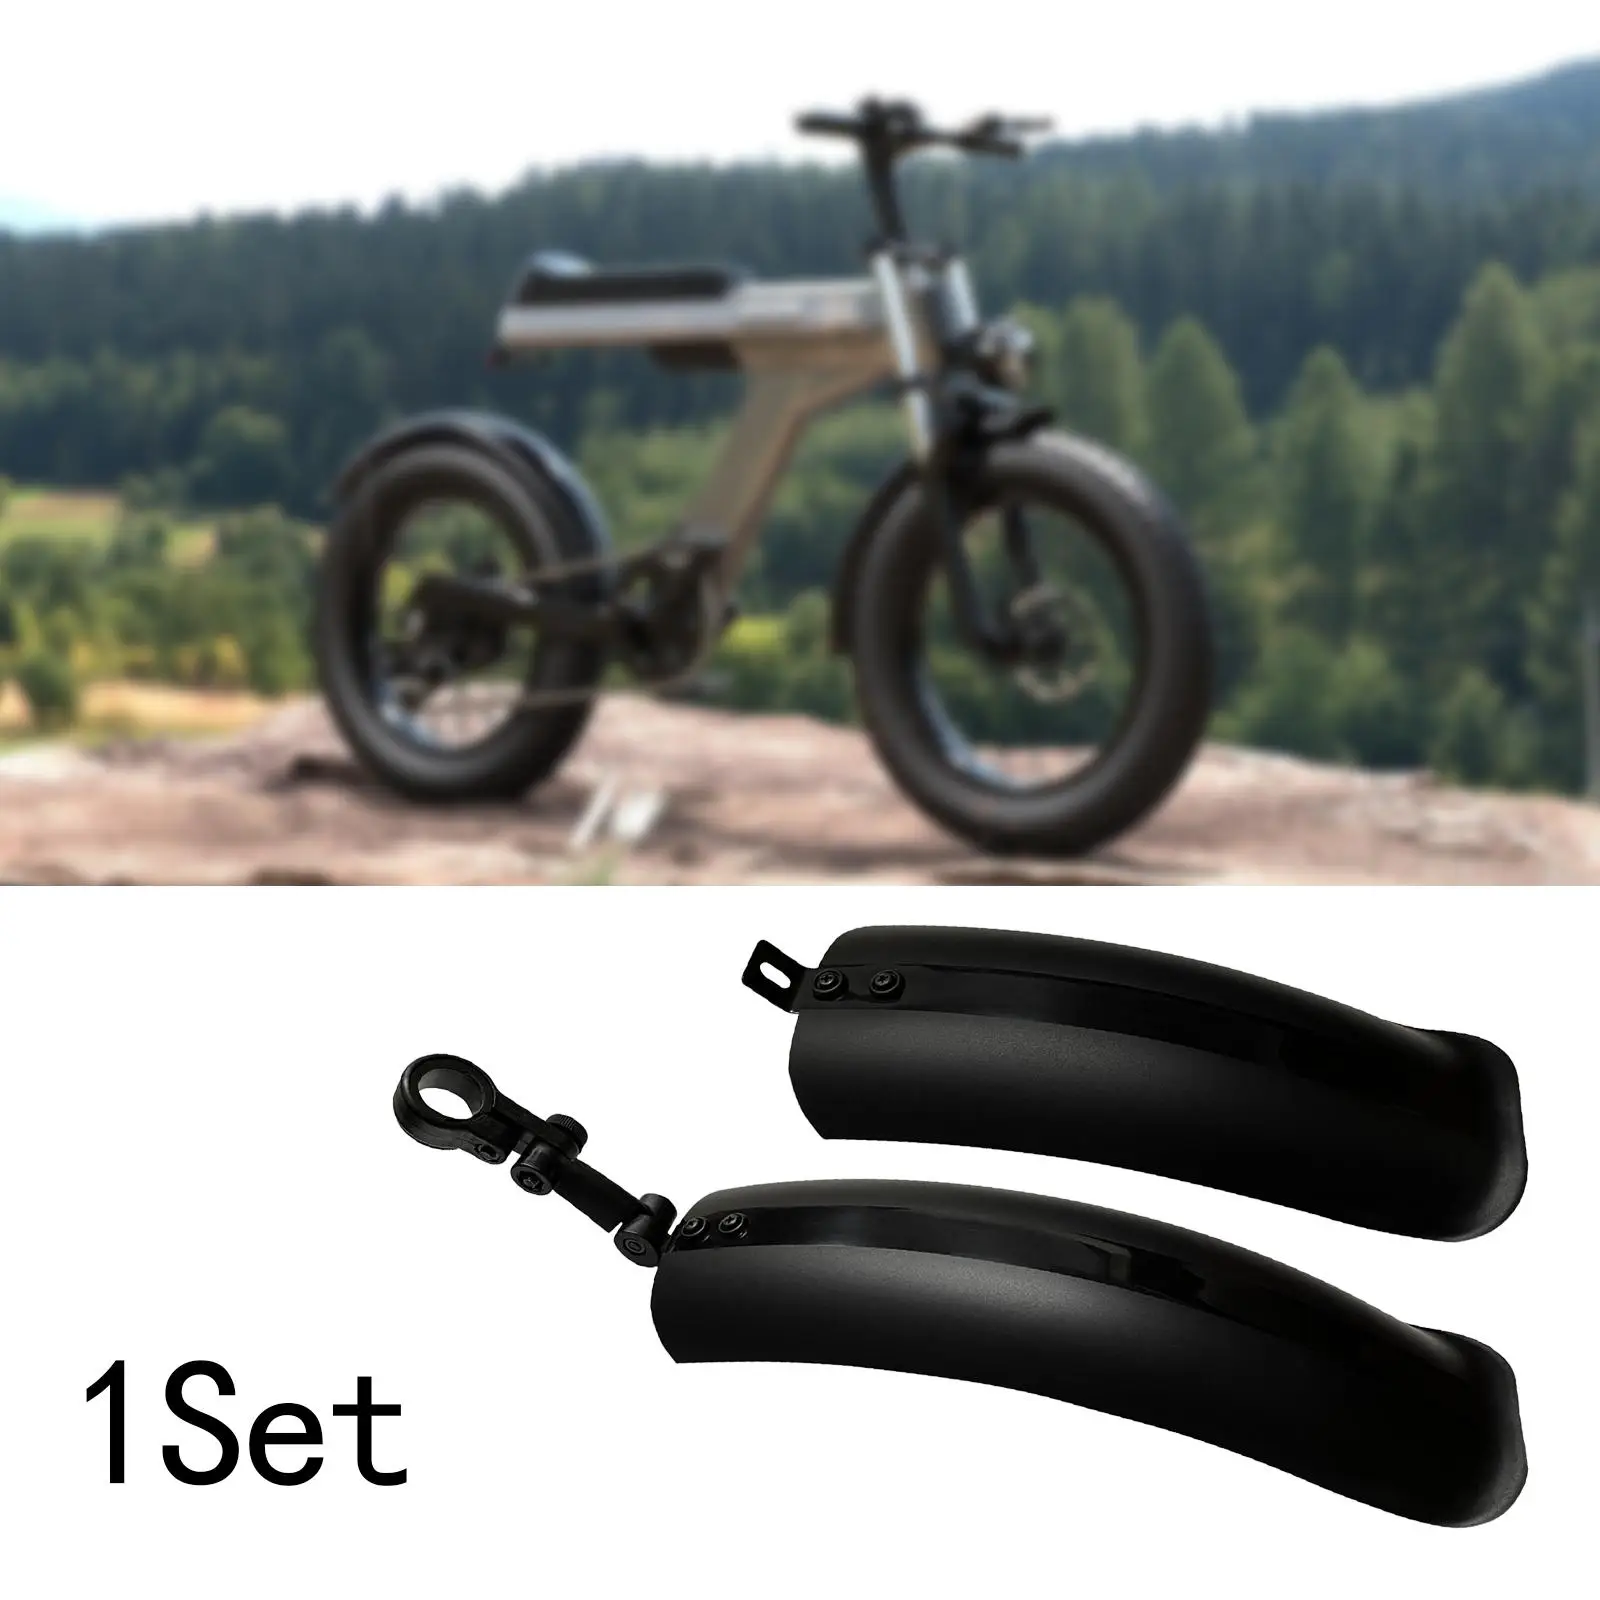 Bike Mudguard Front Rear Set Easy to Install Spare Parts Accs Mud Guard for Beach Bikes Mountain Bike Snow Bikes Outdoor Riding